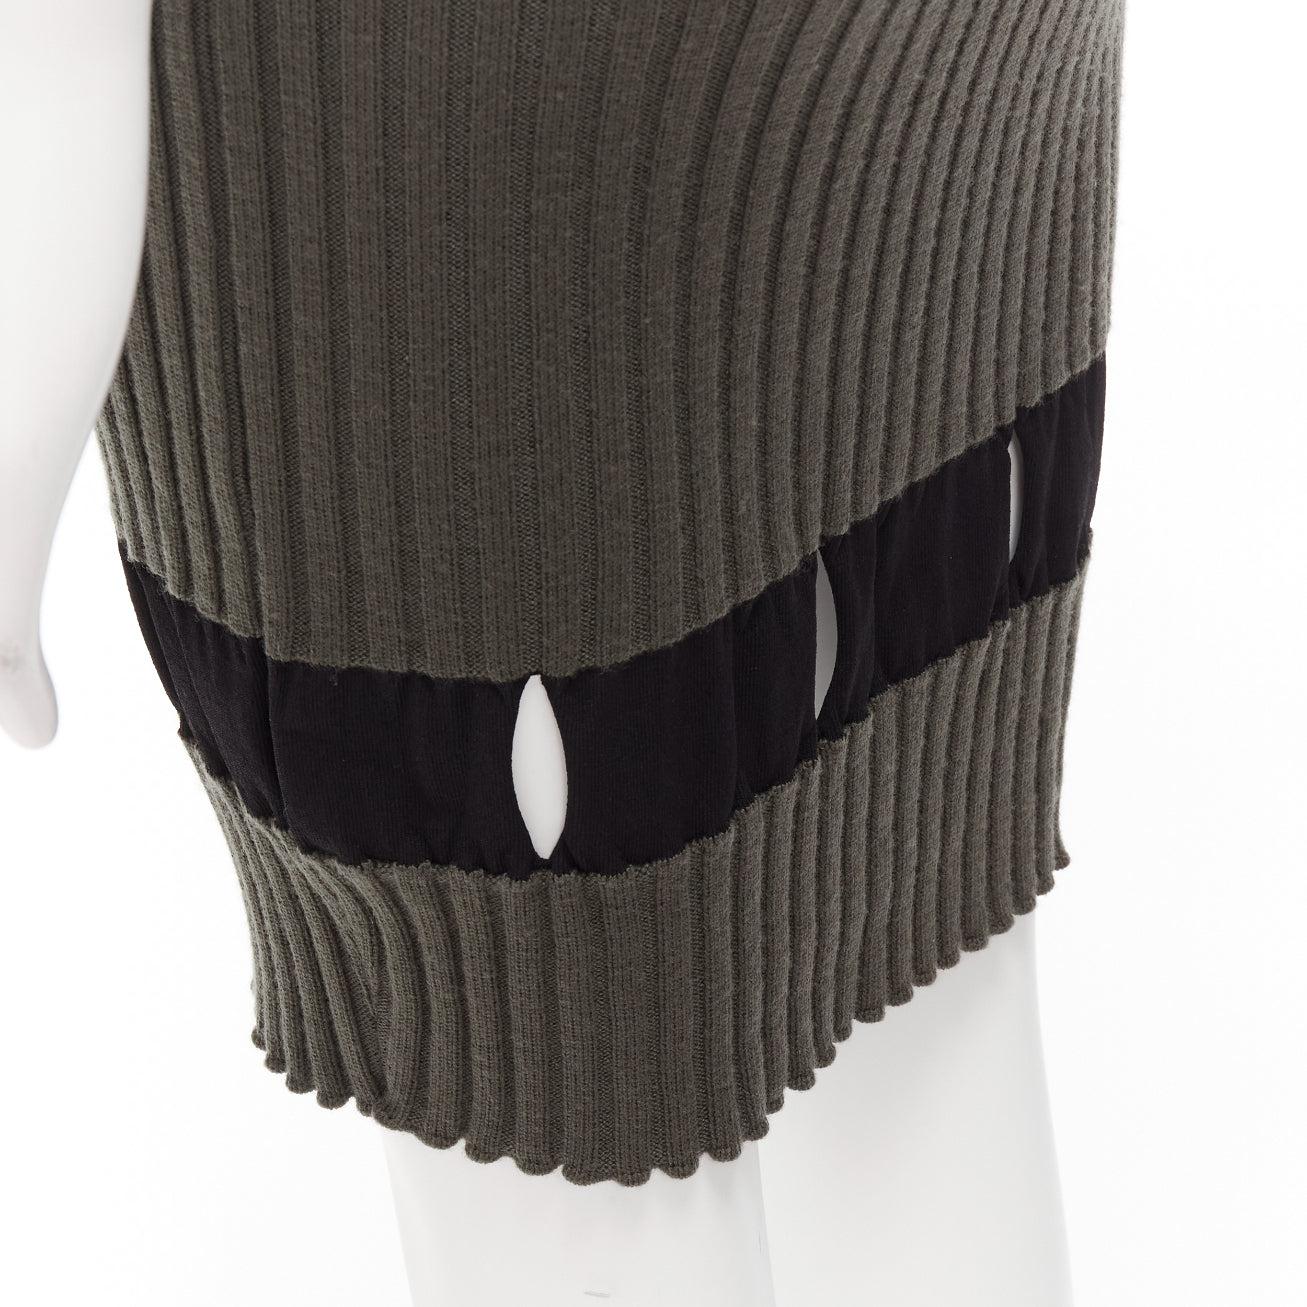 ALEXANDER WANG khaki black ribbed cut out pencil knee skirt XS
Reference: YIKK/A00071
Brand: Alexander Wang
Designer: Alexander Wang
Material: Fabric
Color: Khaki, Black
Pattern: Solid
Closure: Elasticated
Made in: Italy

CONDITION:
Condition: